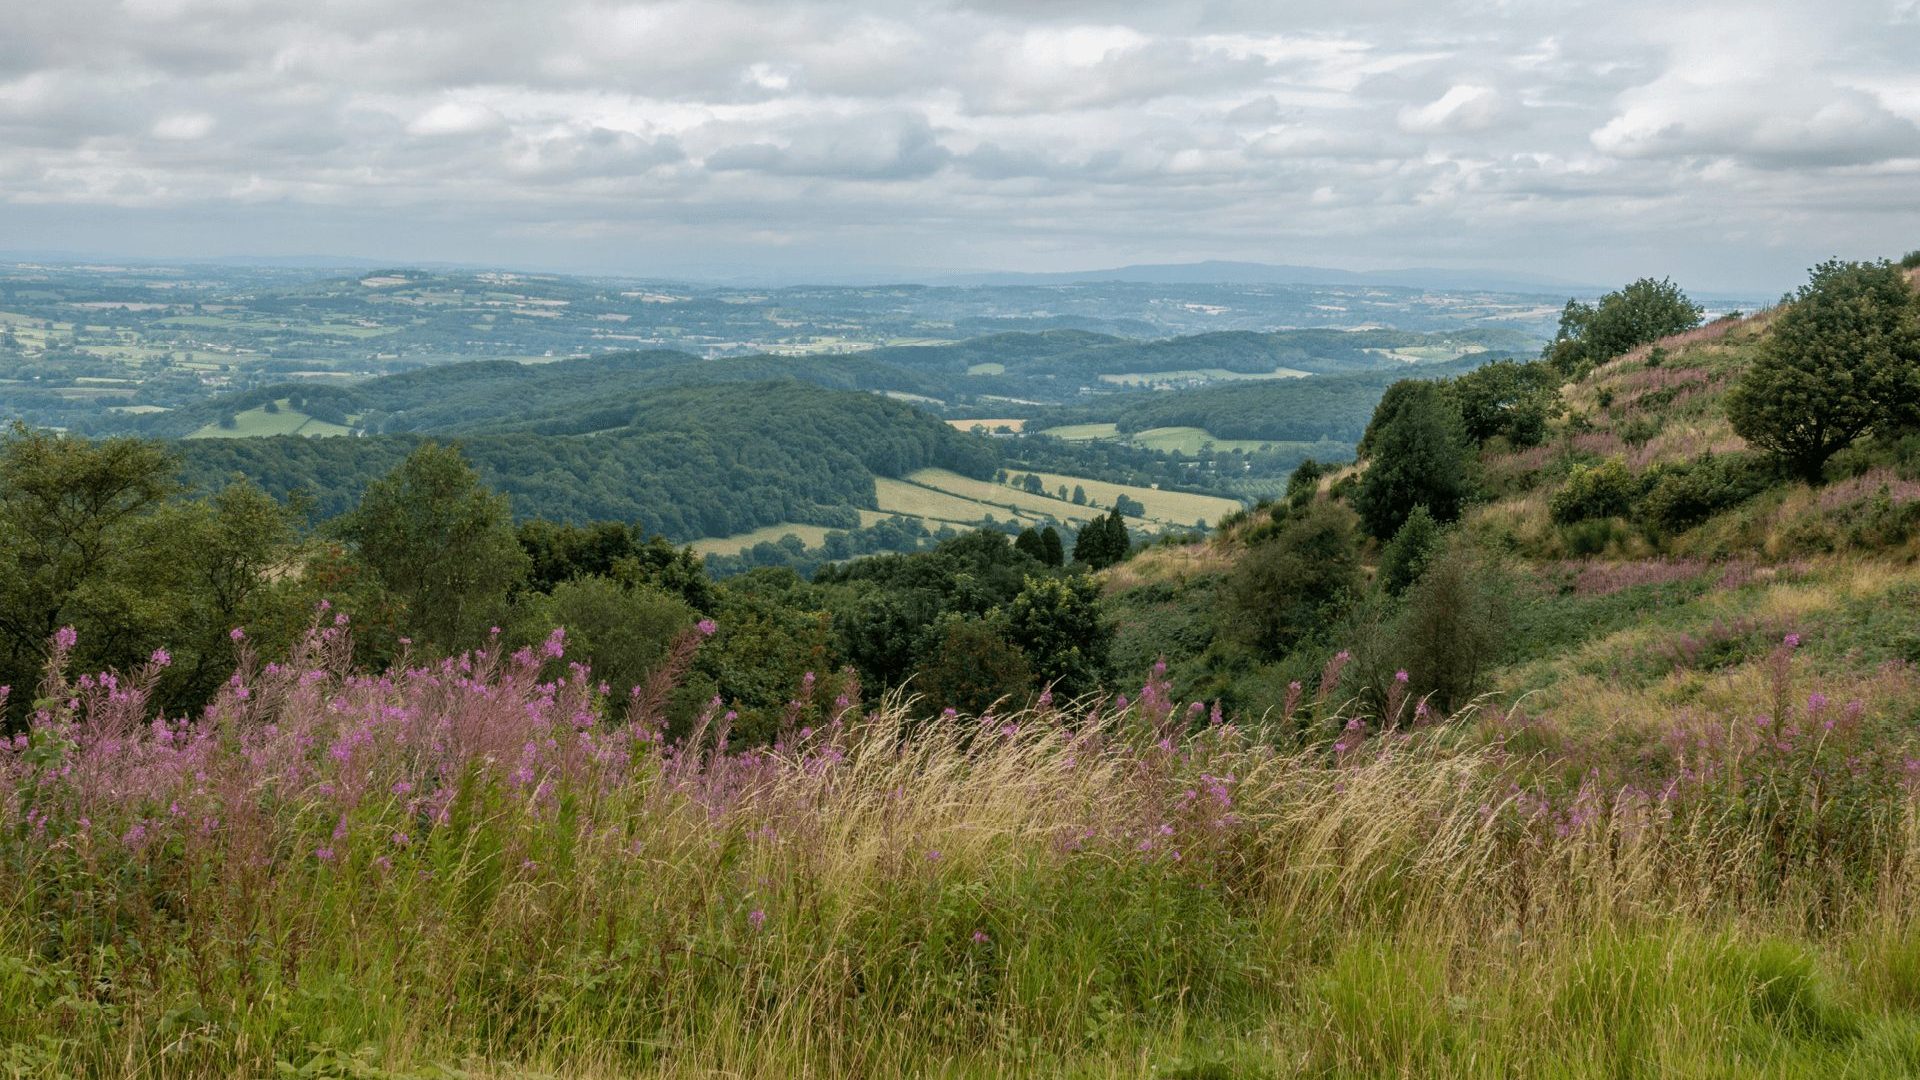 A beautiful view of the Malvern Hills with wild flowers in the foreground